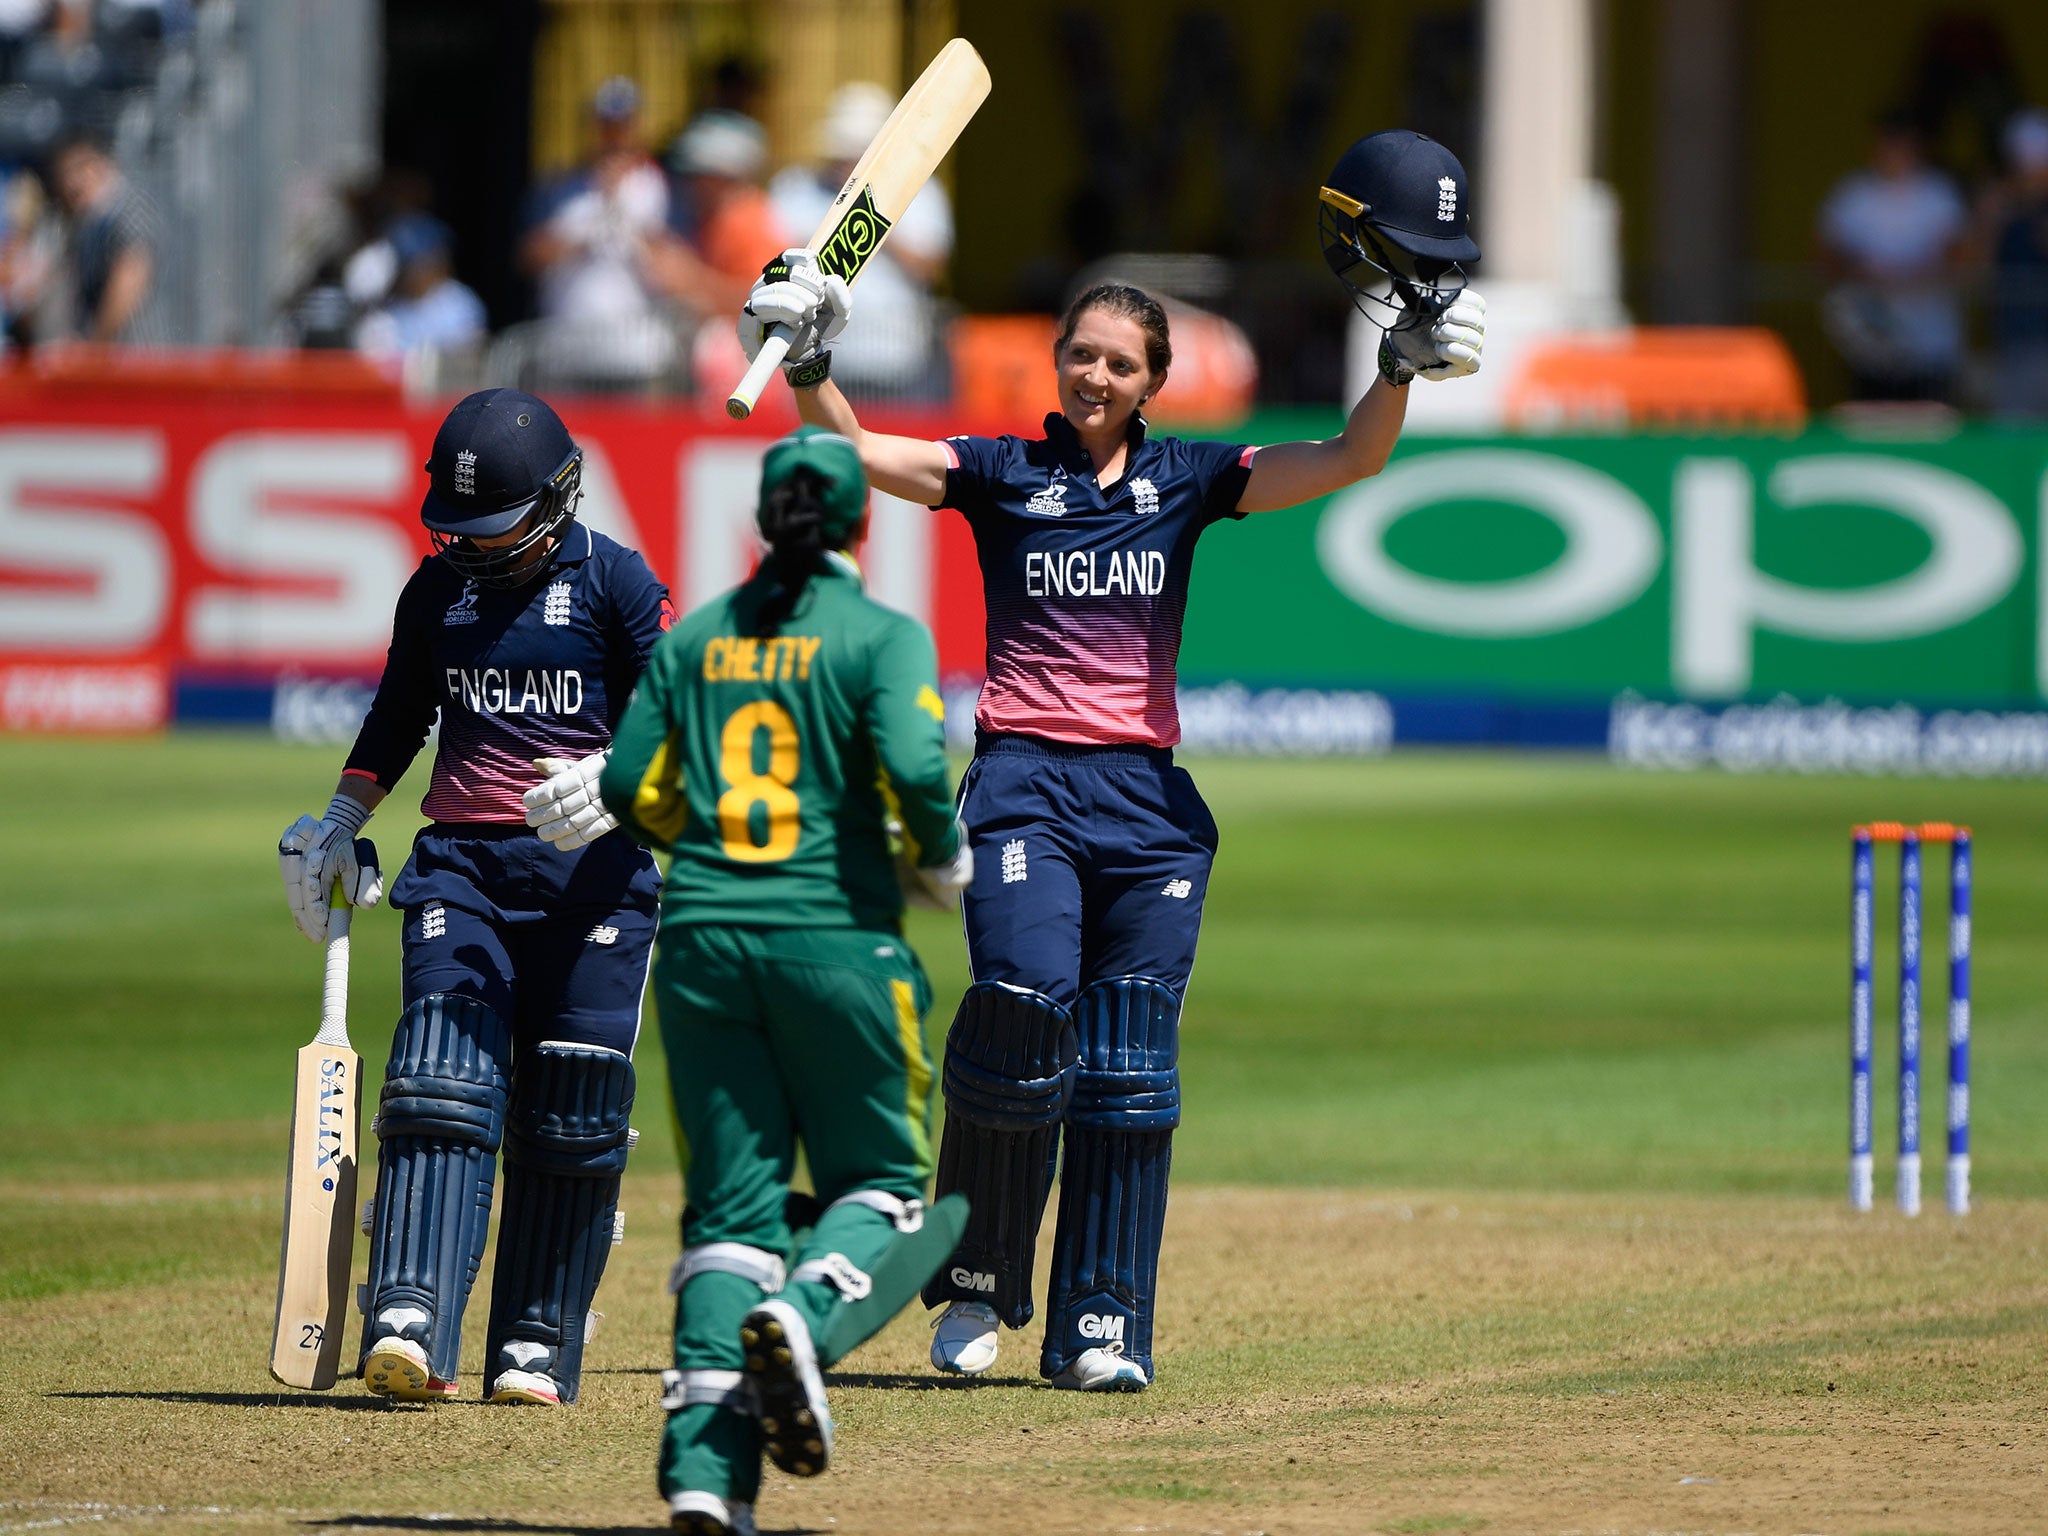 Sarah Taylor celebrates after hitting her century for England